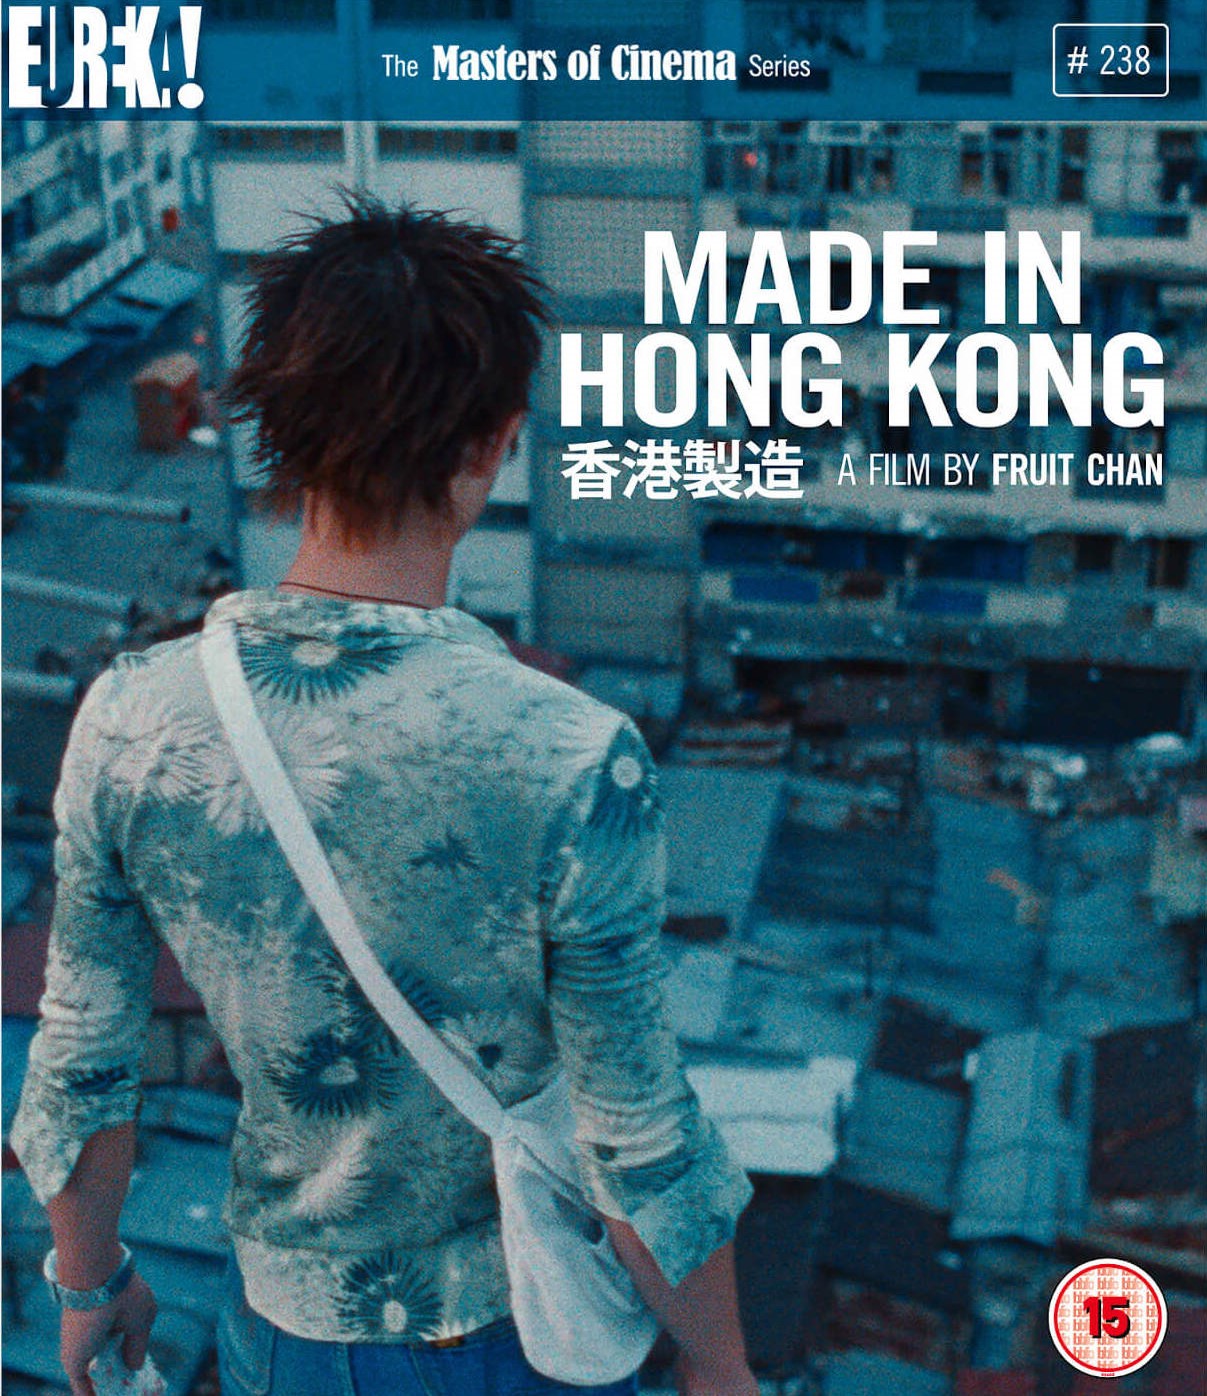 MADE IN HONG KONG (REGION B IMPORT - LIMITED EDITION) BLU-RAY